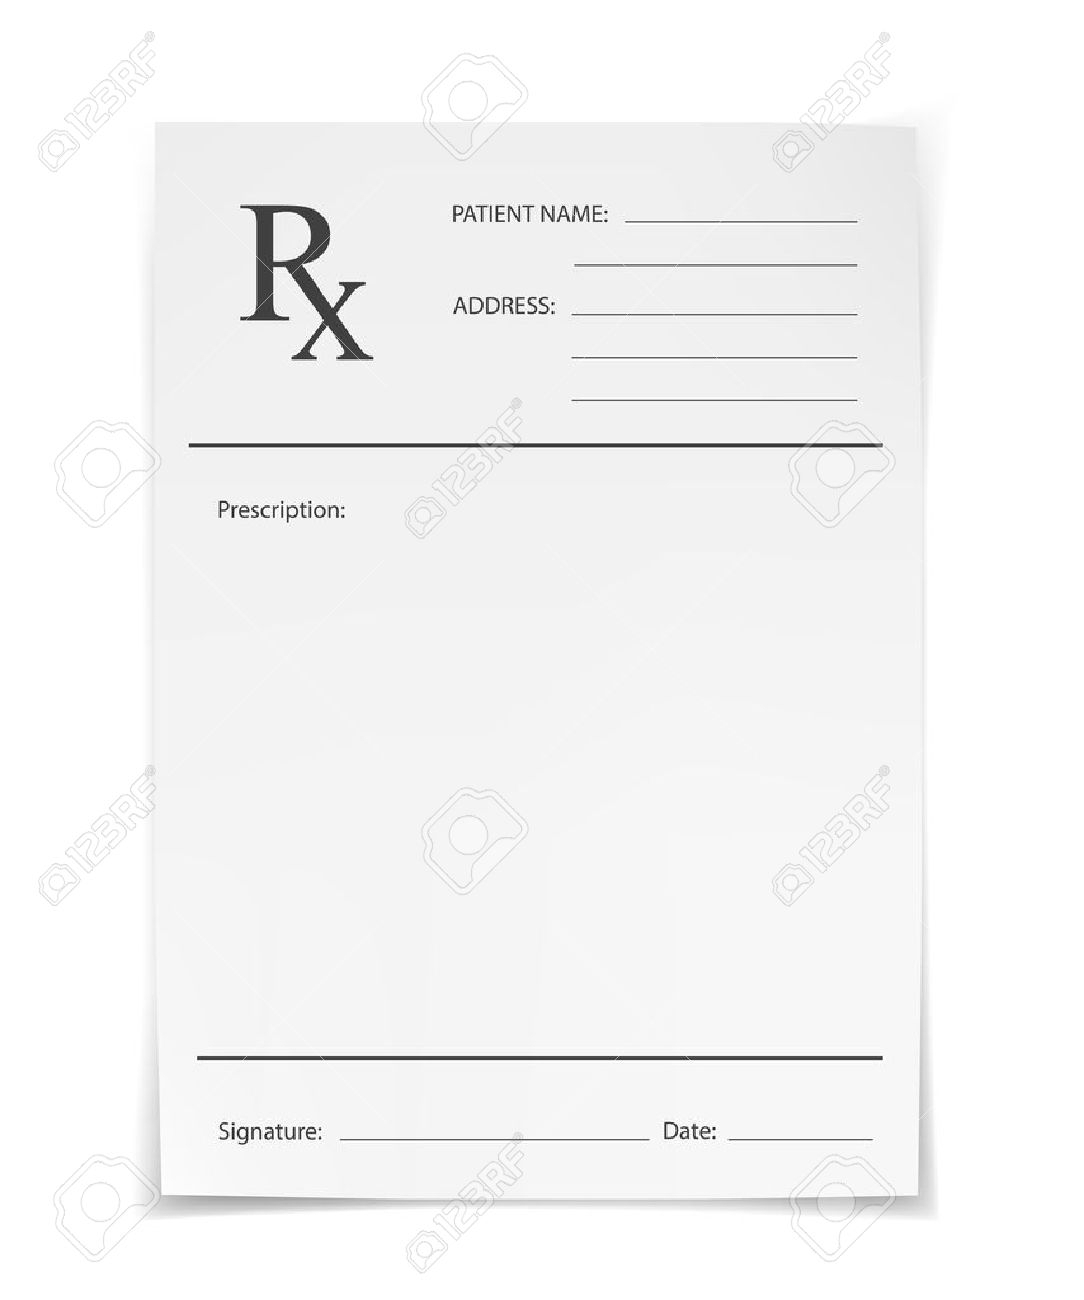 Blank Rx Prescription Form Isolated On White Background Throughout Blank Prescription Form Template